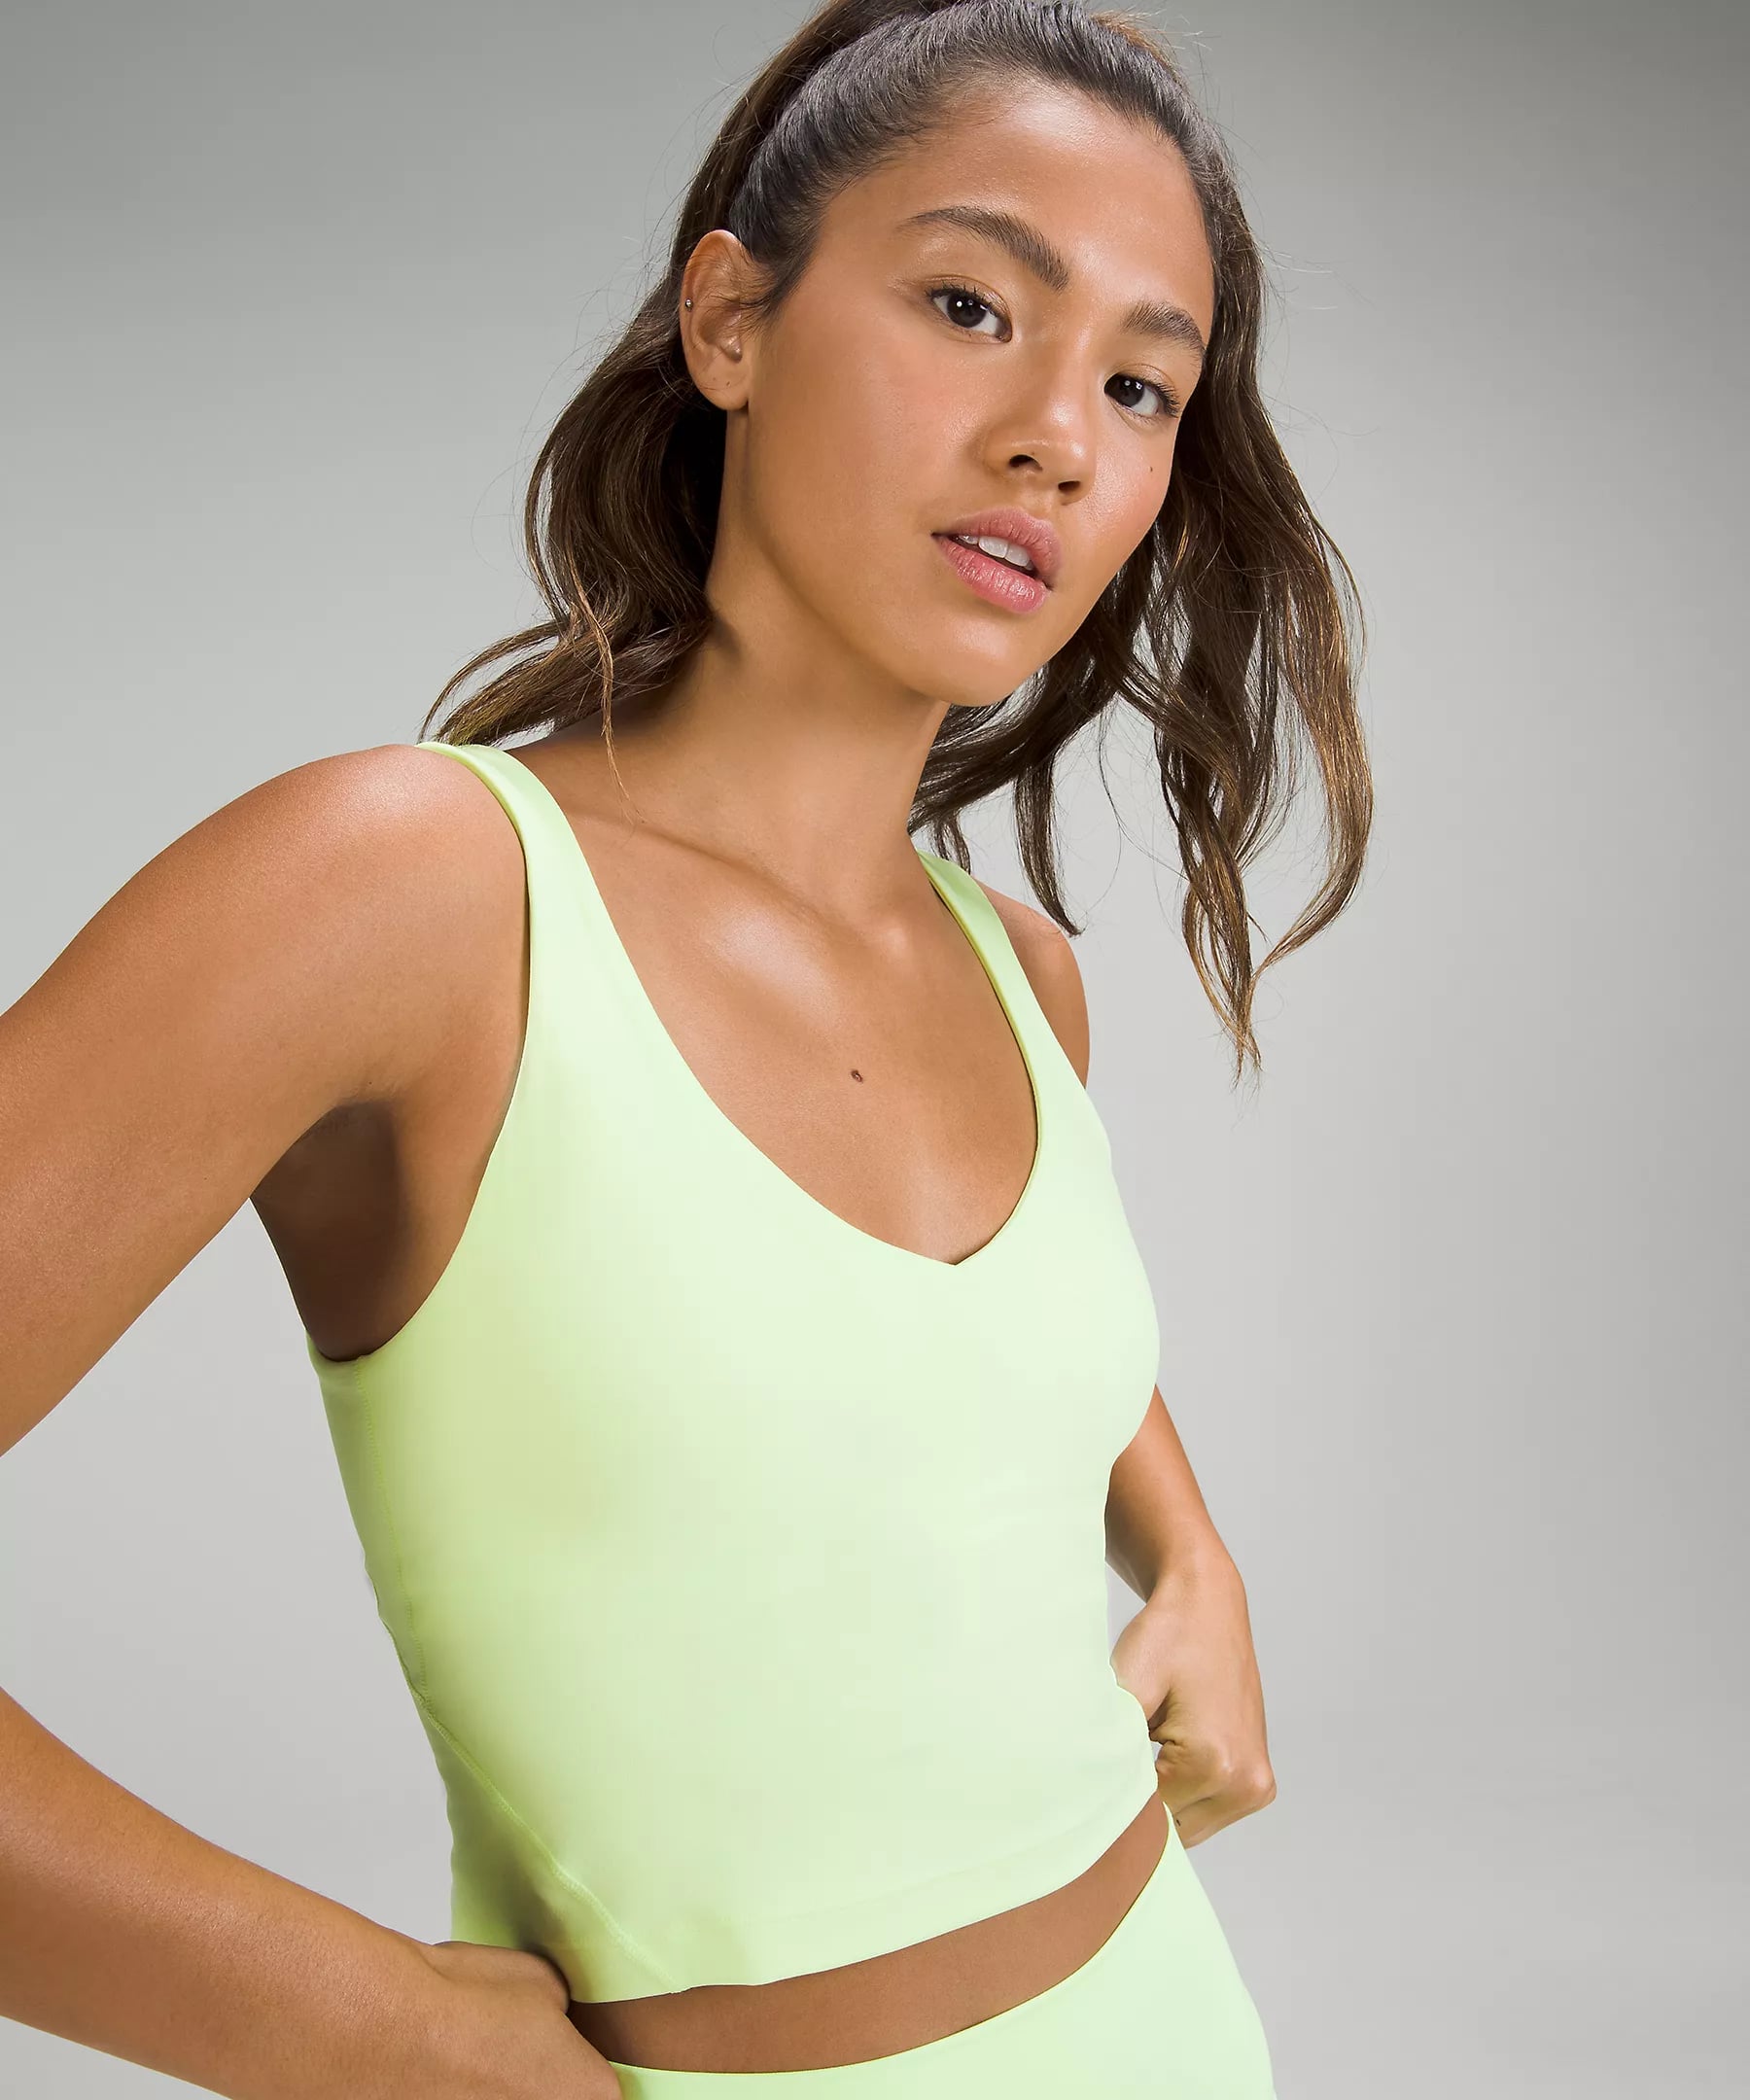 10 Best Built-In Bra Workout Tops 2023 - The Most Supportive Workout Tops